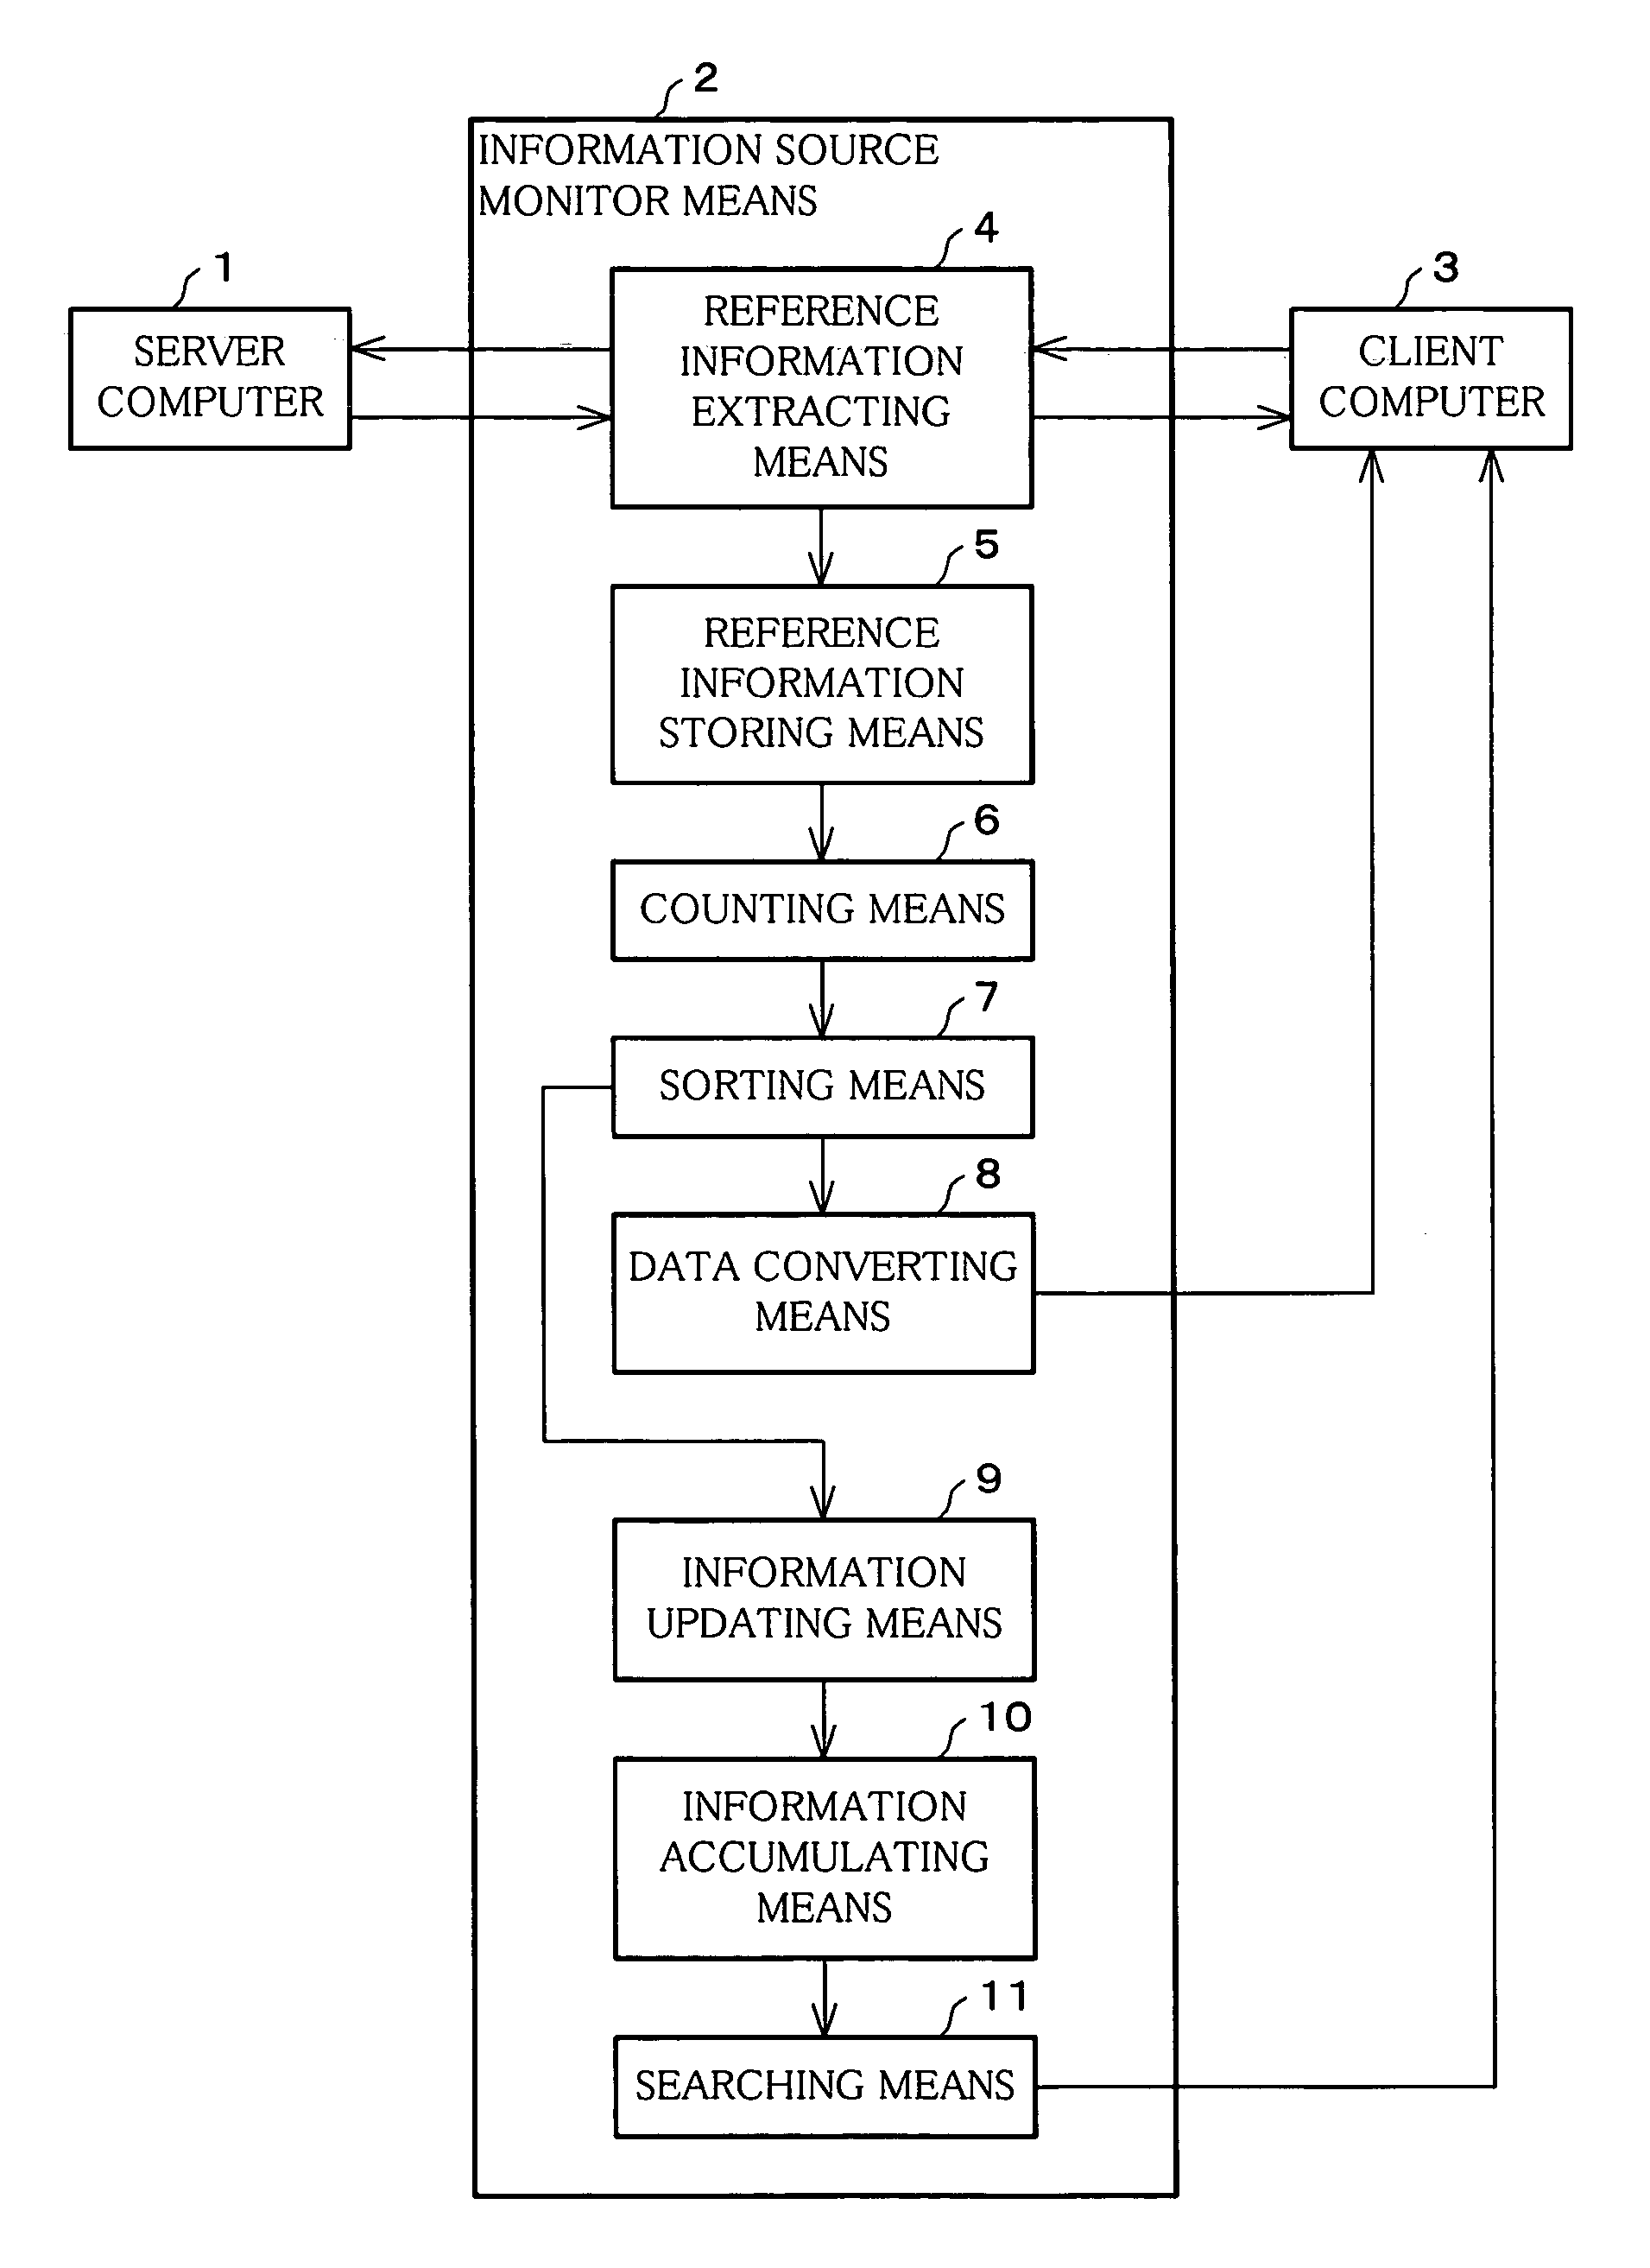 Information source monitor device for network information, monitoring and display method for the same, storage medium storing the method as a program, and a computer for executing the program